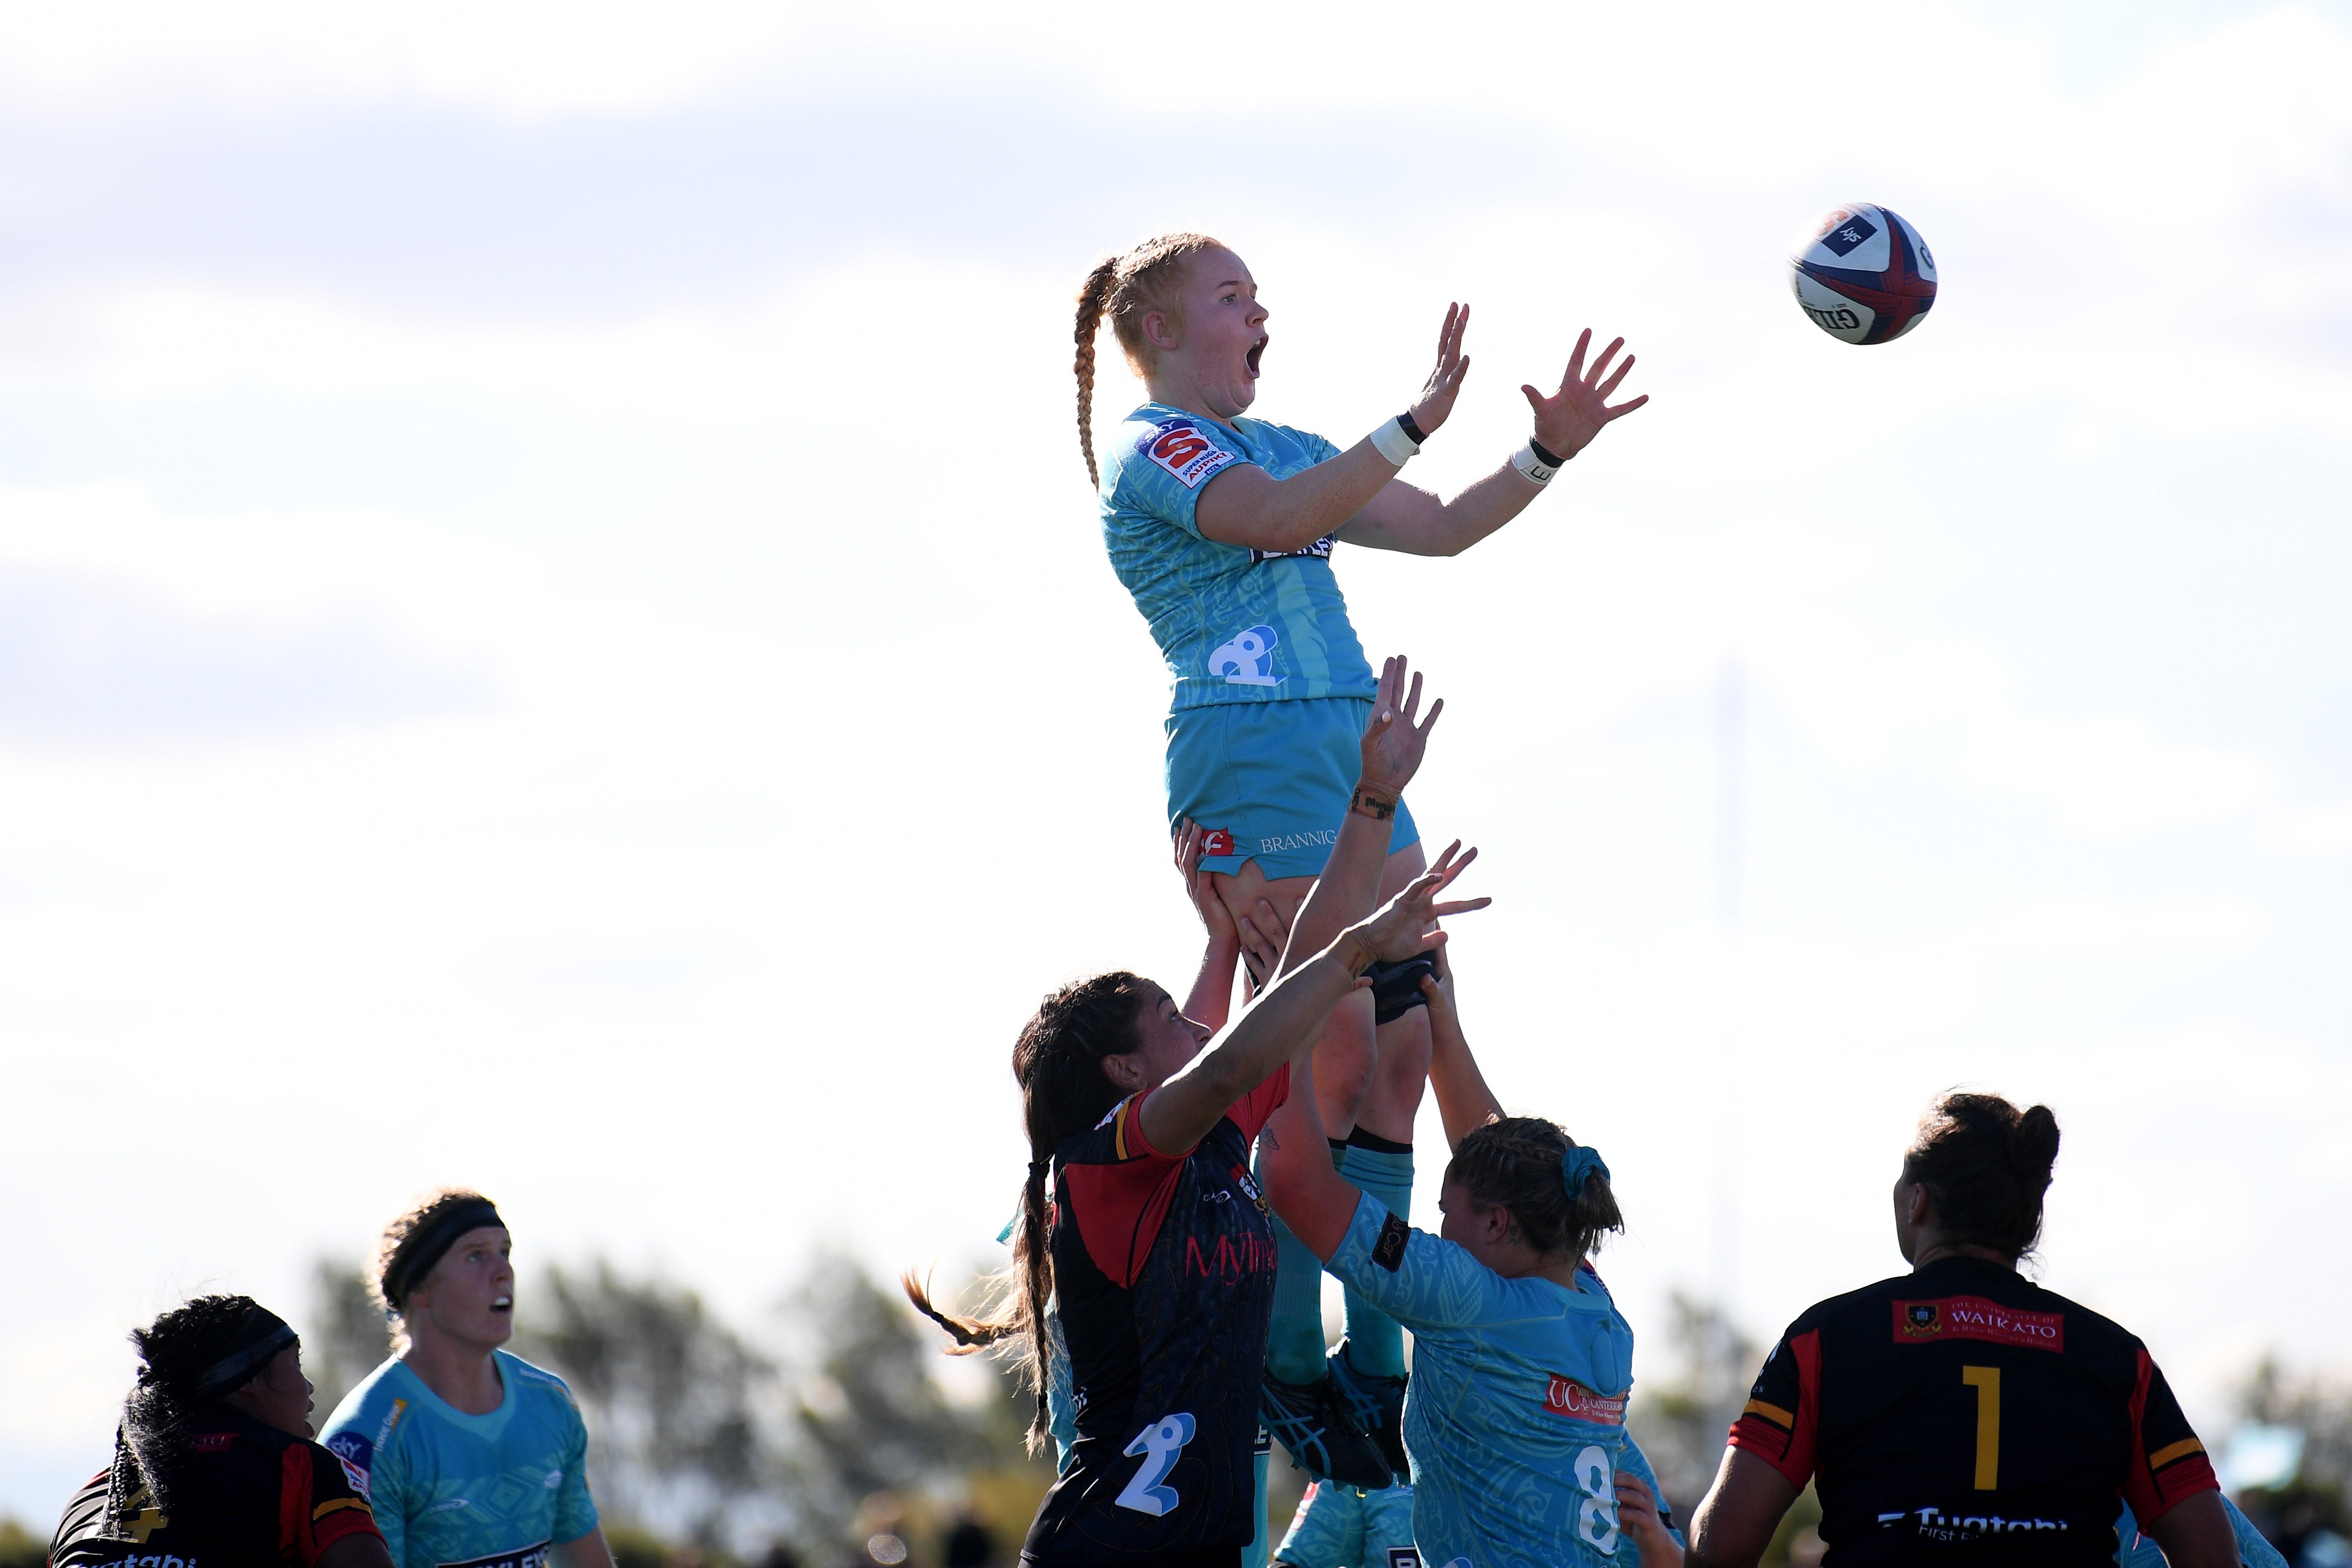 Lucy Jenkins, of Matatū, collects the ball from a lineout during her team’s round six Super Rugby...